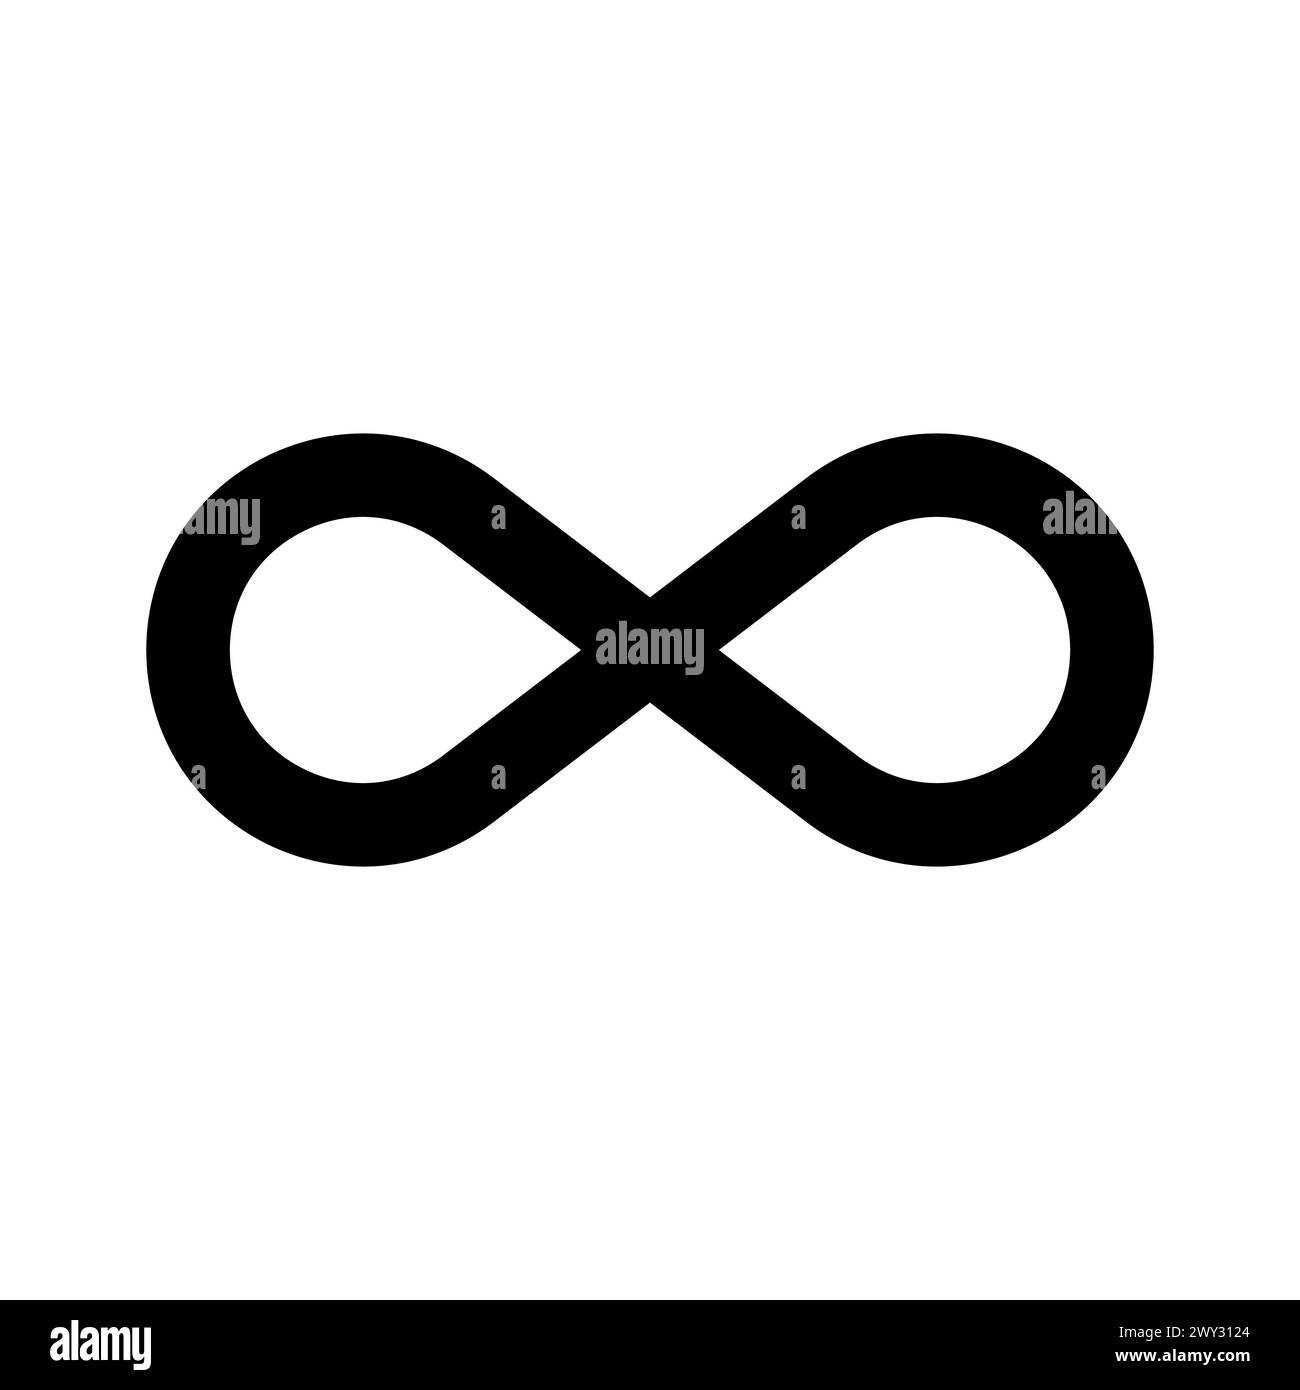 Infinity symbol. Limitless concept sign. Eternal loop icon. Endlessness emblem. Vector illustration. EPS 10. Stock Vector